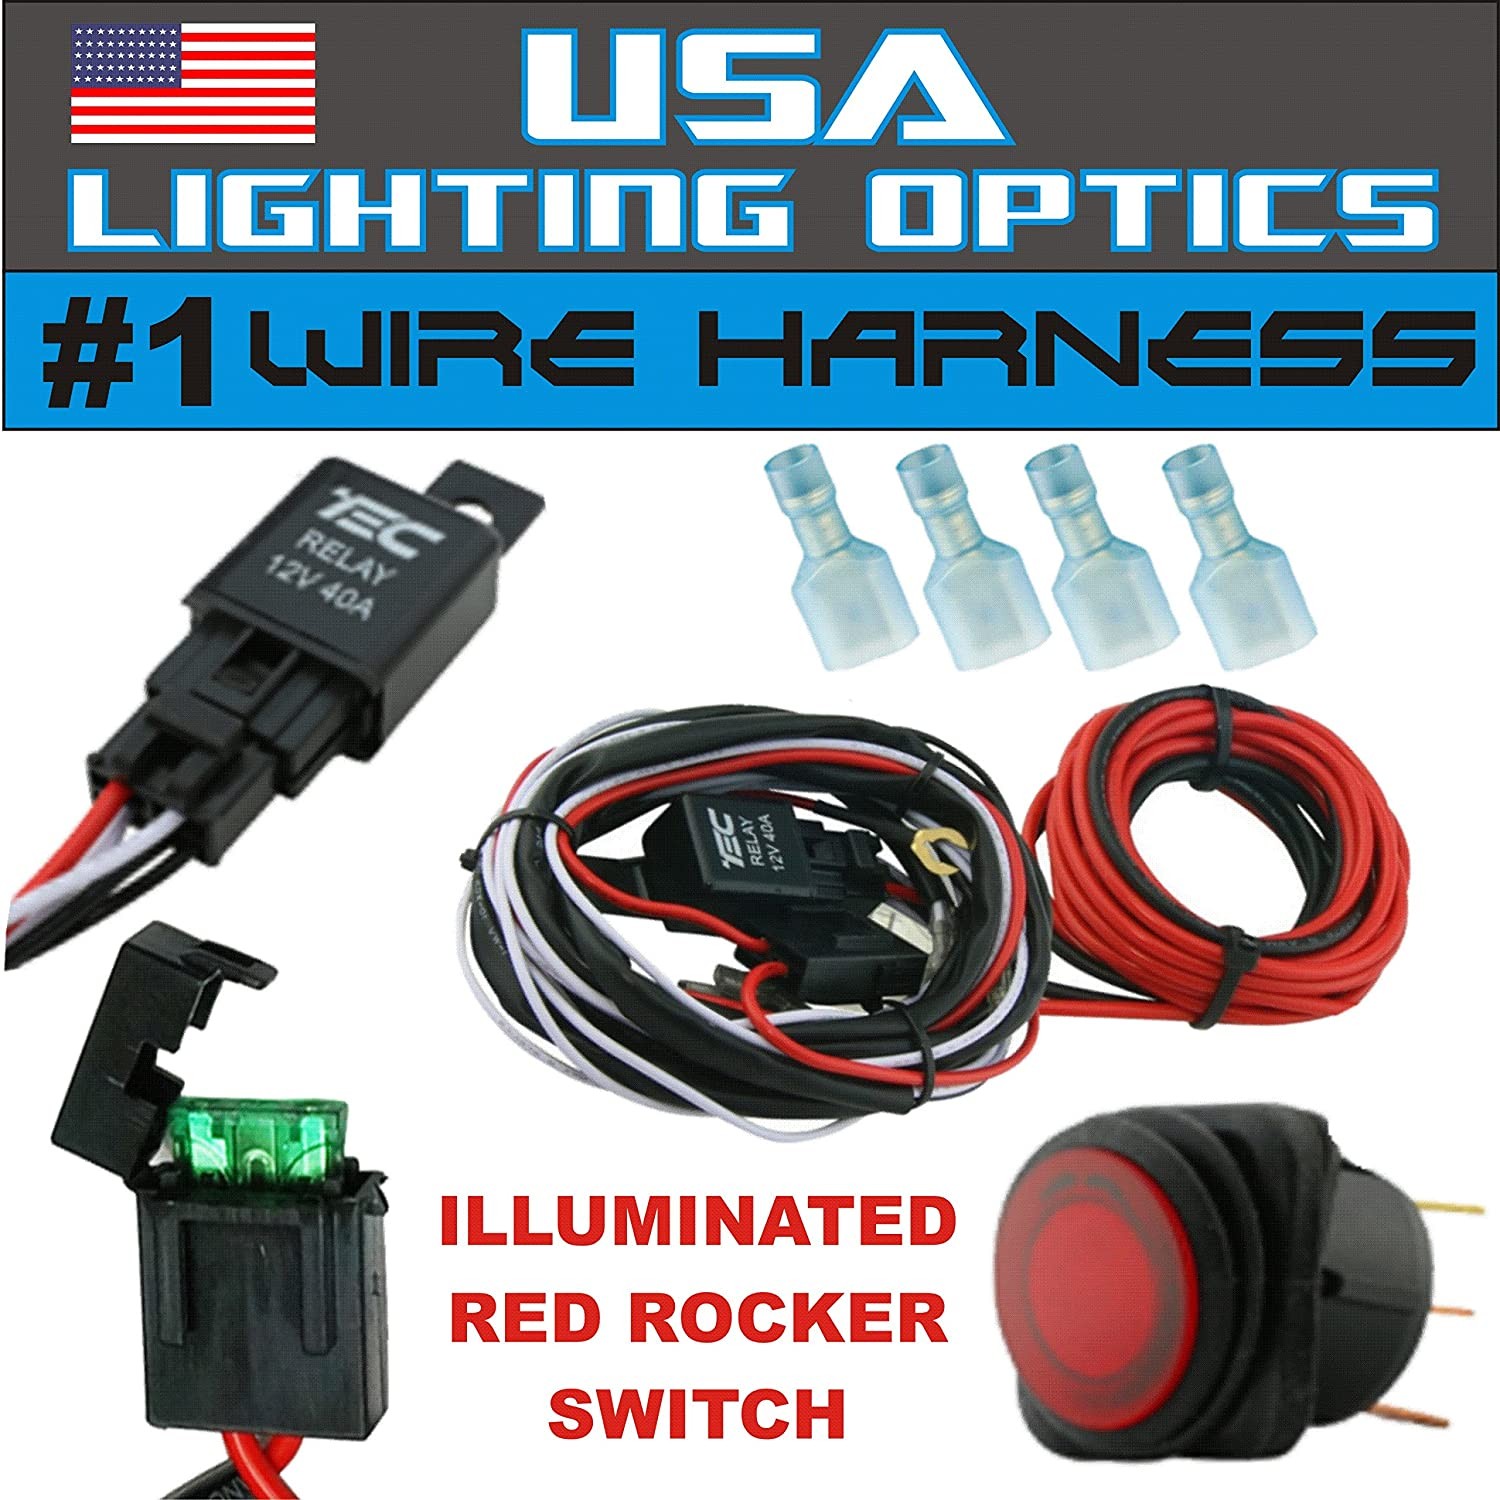 Will A Yamaha Kodiak 450 Wiring Harness Work On A 400 1 40 Amp Universal Wiring Harness for F Road Led Light Bars Relay On Off Switch and Led Work Light Lamps atv Utv Truck Suv Polaris Razor Rzr Of Will A Yamaha Kodiak 450 Wiring Harness Work On A 400